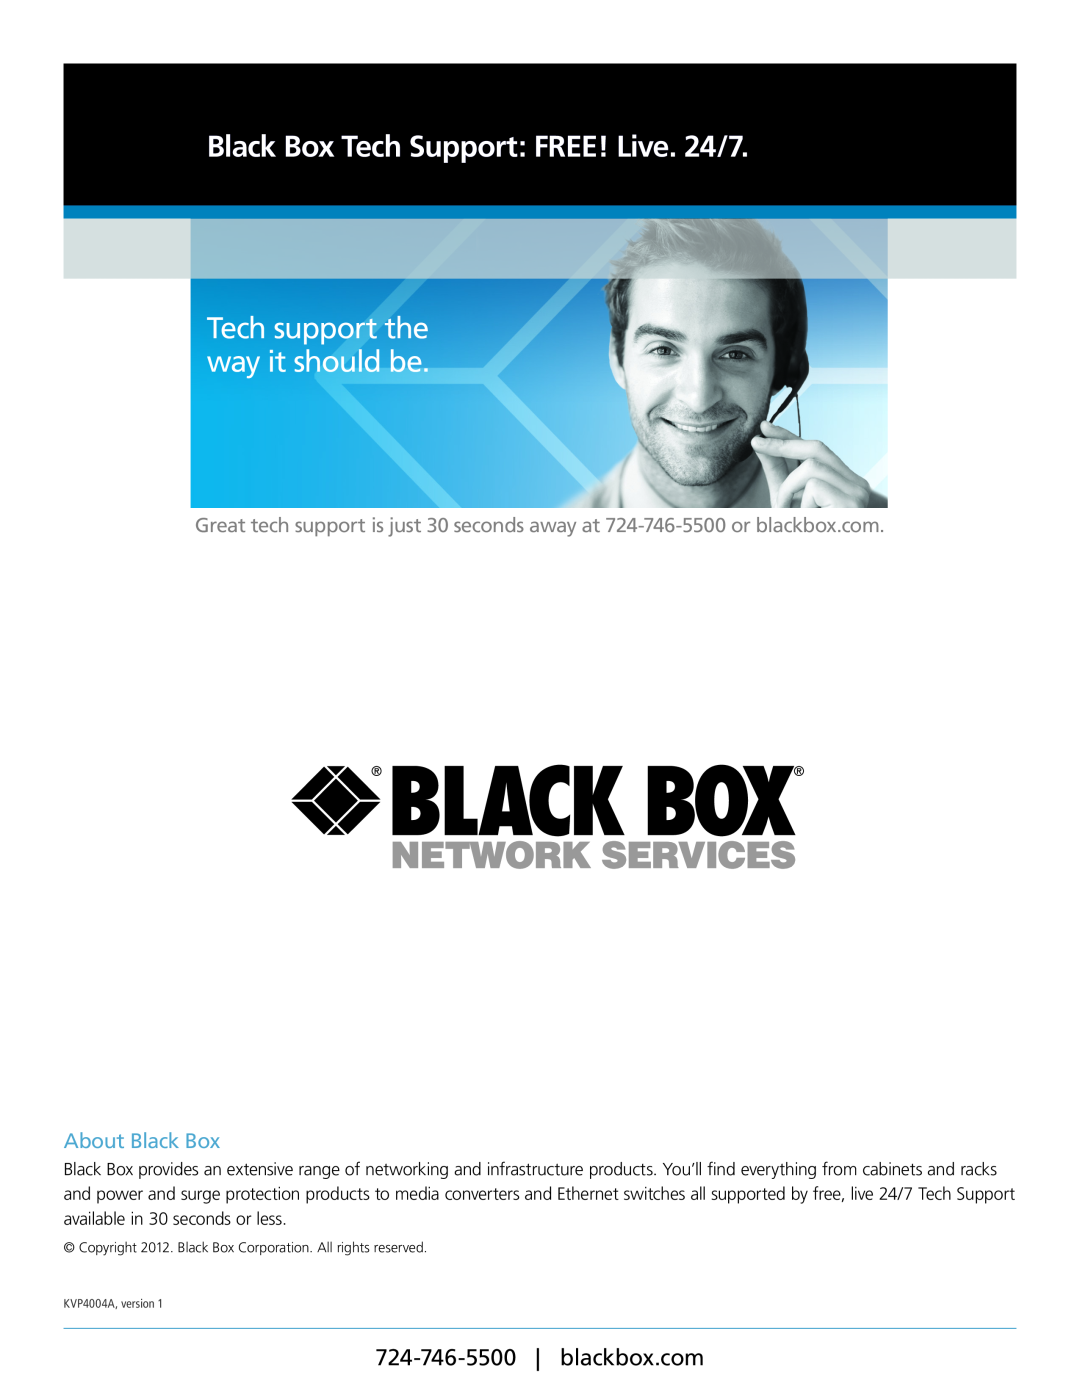 Black Box KVP40004A manual Black Box Tech Support FREE! Live. 24/7, Tech support the way it should be, About Black Box 